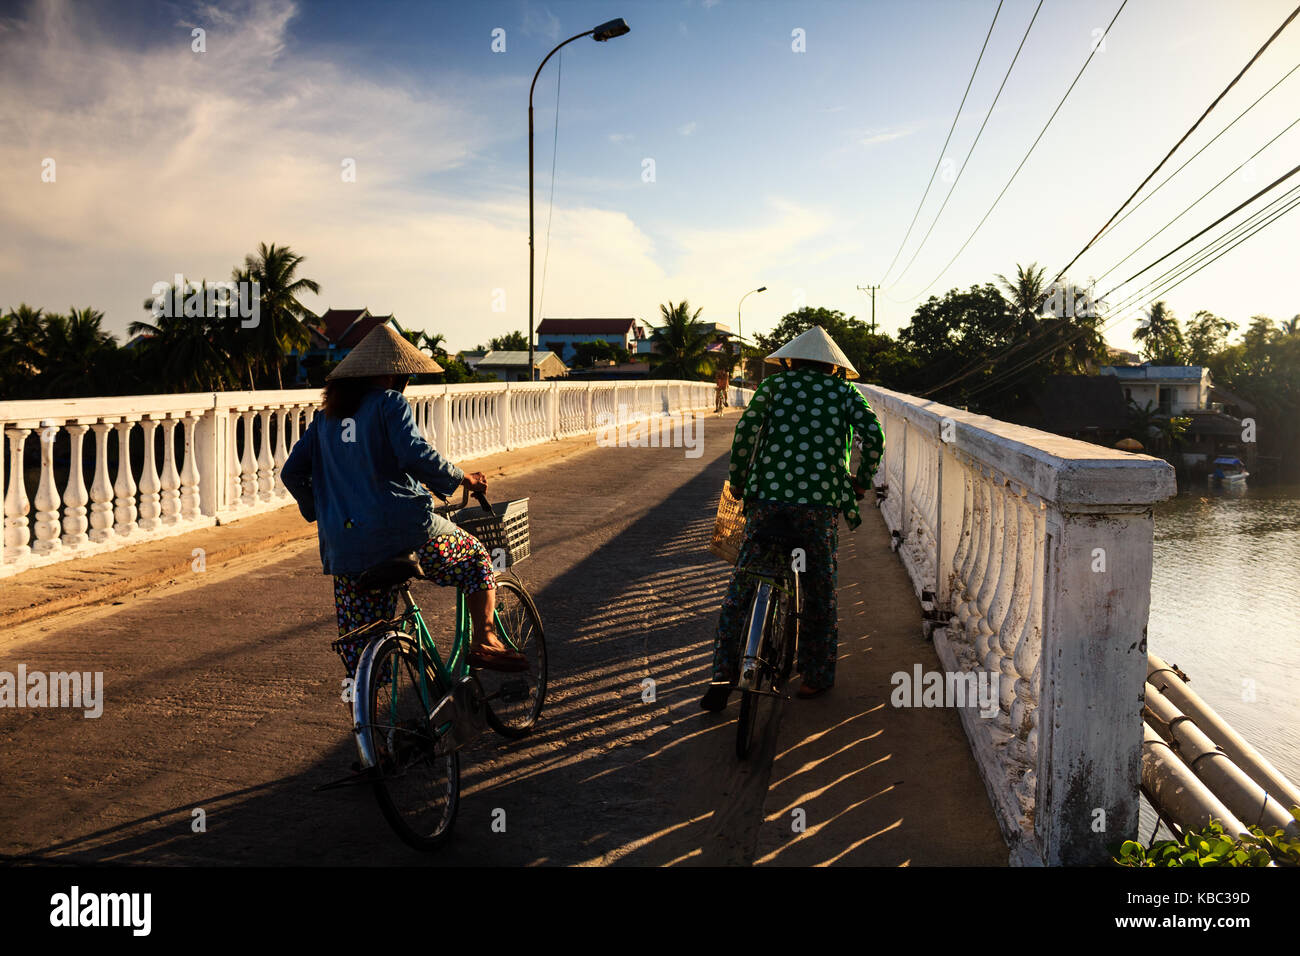 Two local women are on the way to local market, Quang Nam, Vietnam. Quang Nam has 2 UNESCO World Heritage Sites: Hoi An ancient town and the My Son Stock Photo